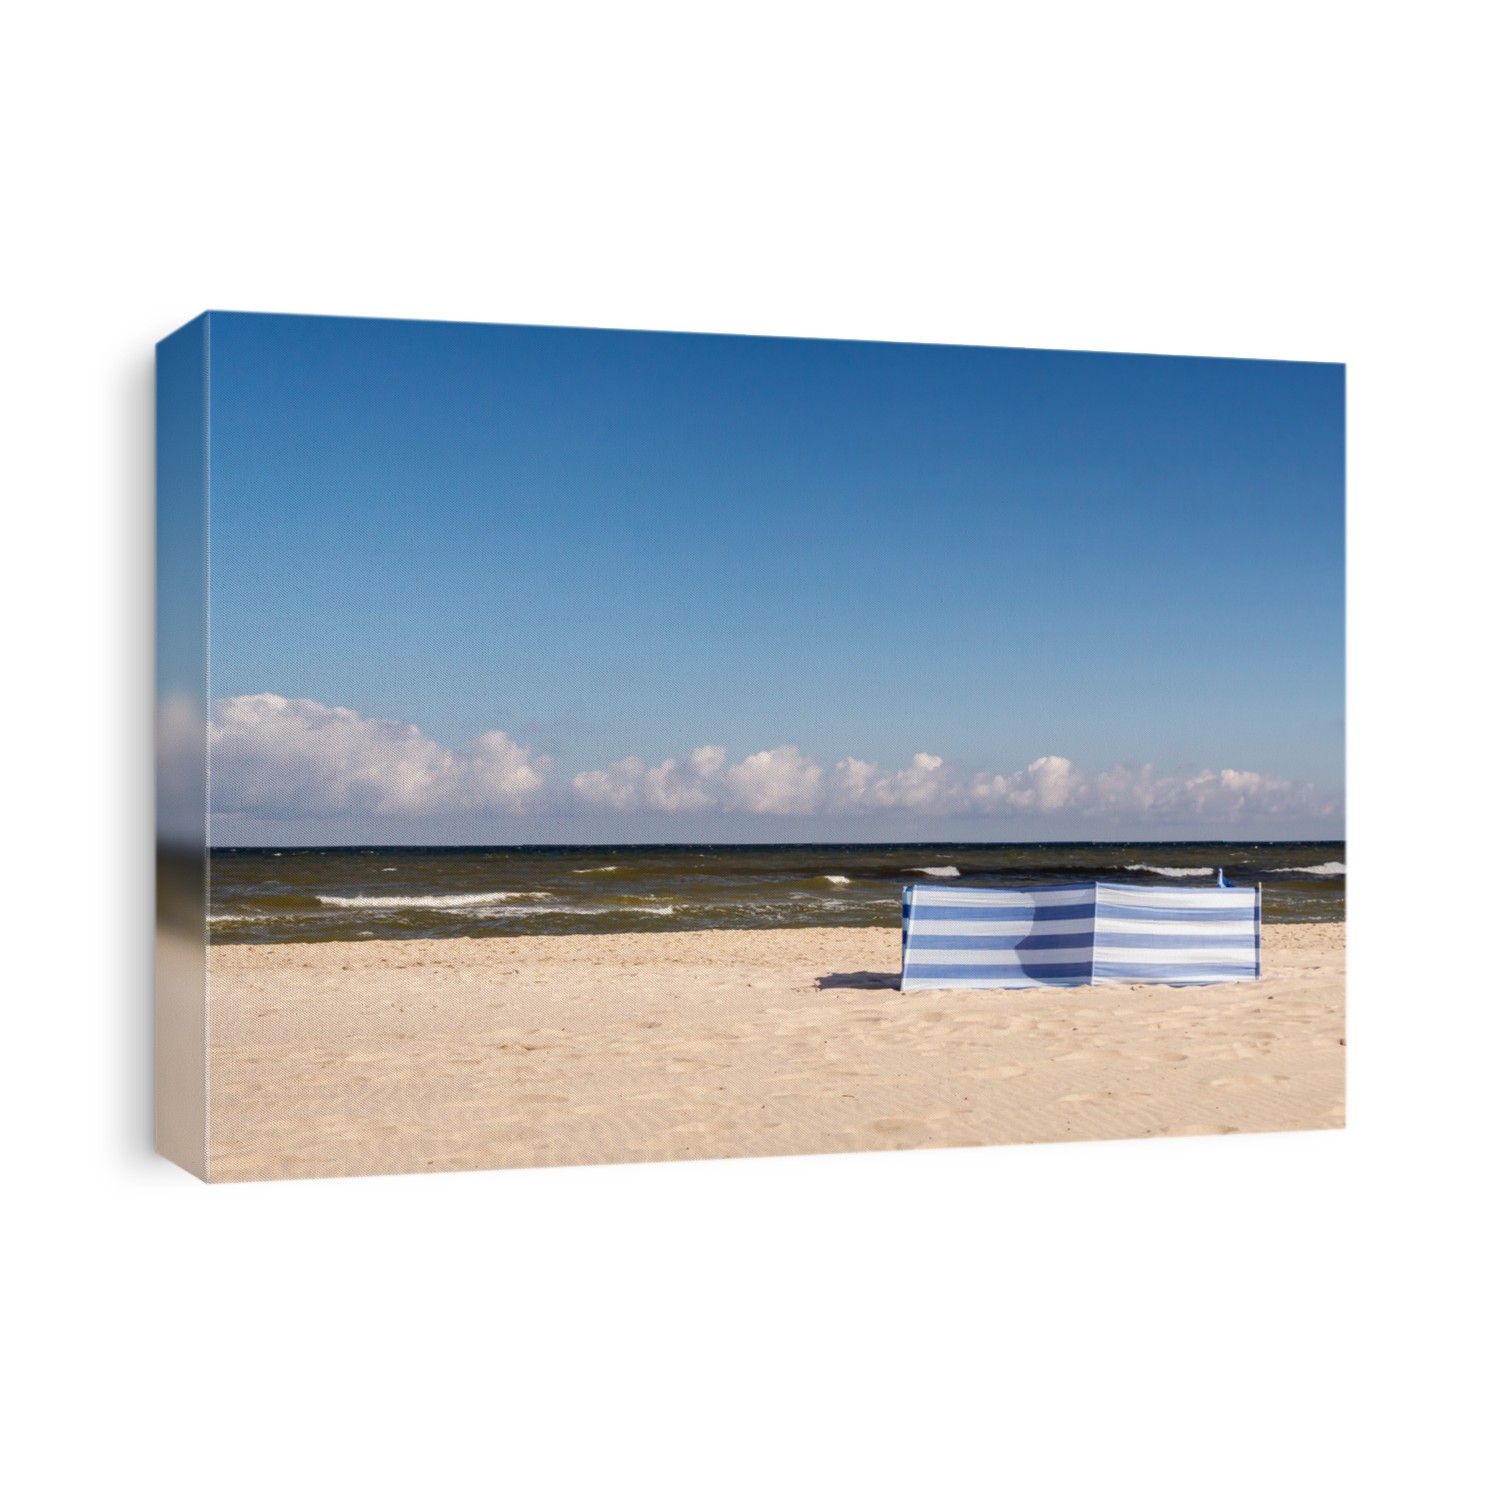 White and blue striped windbreak at the beach